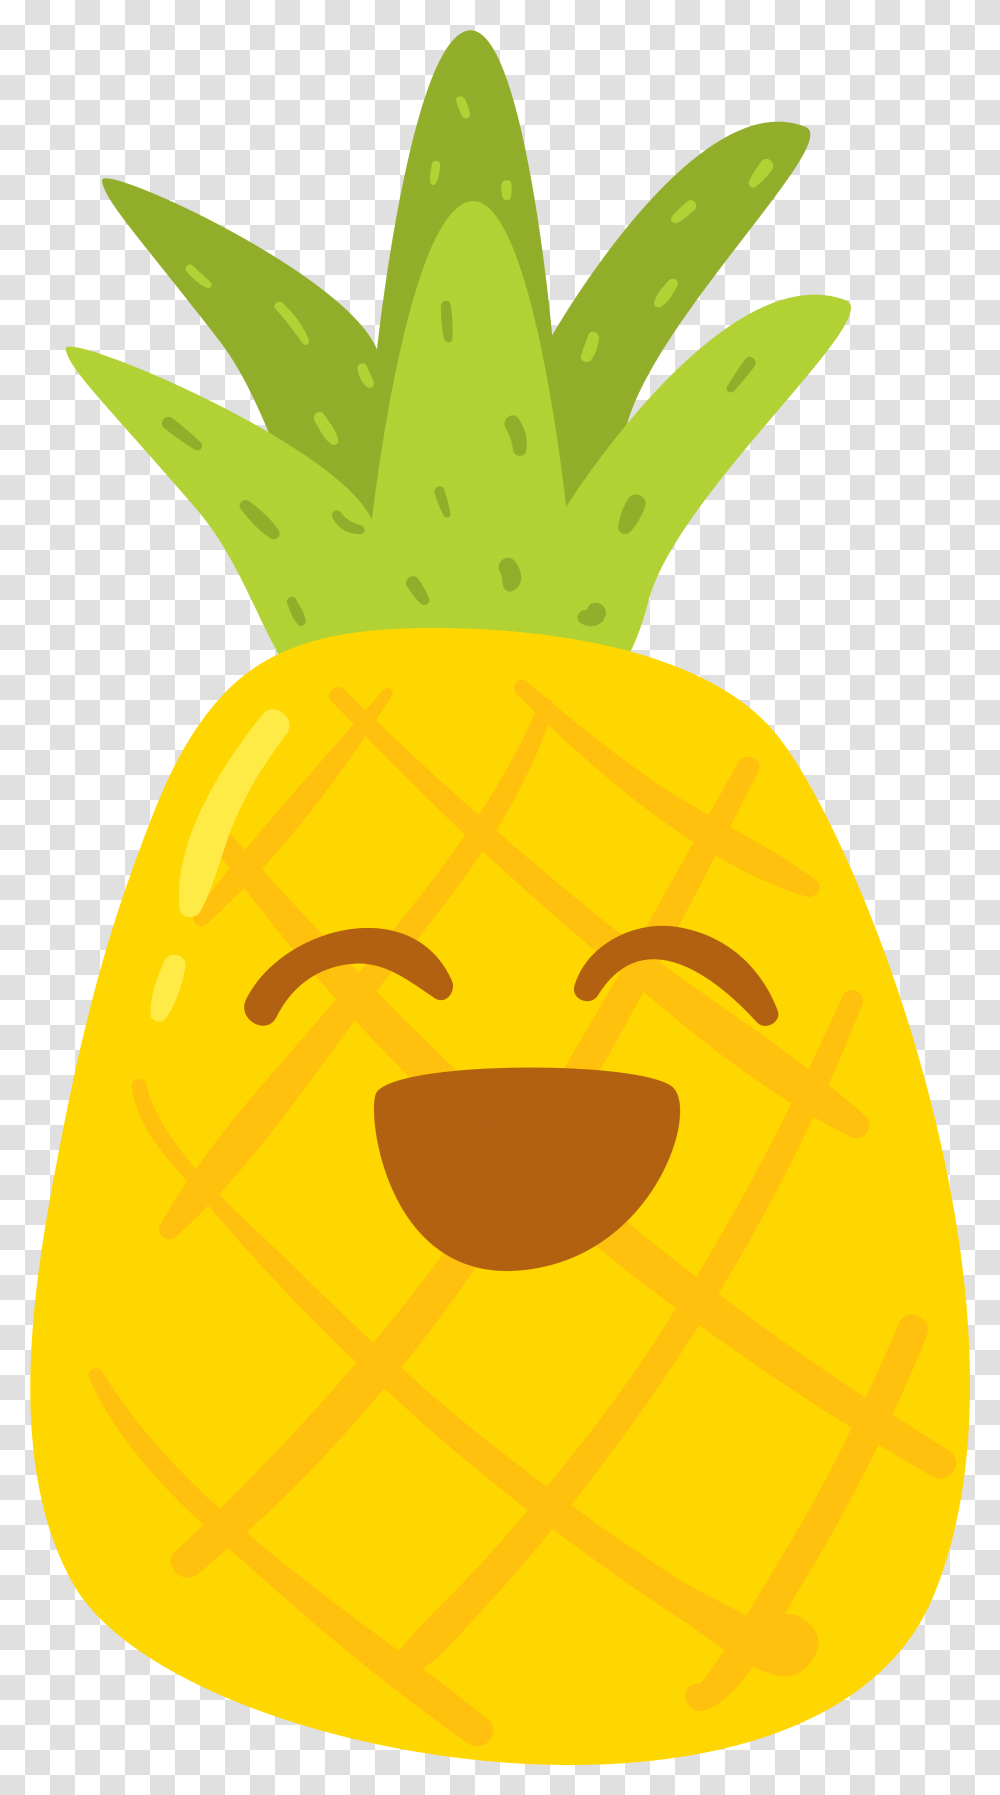 Drawn Cartoon Cute Pineapple Decoration Cute Pineapple, Plant, Food, Carrot, Vegetable Transparent Png